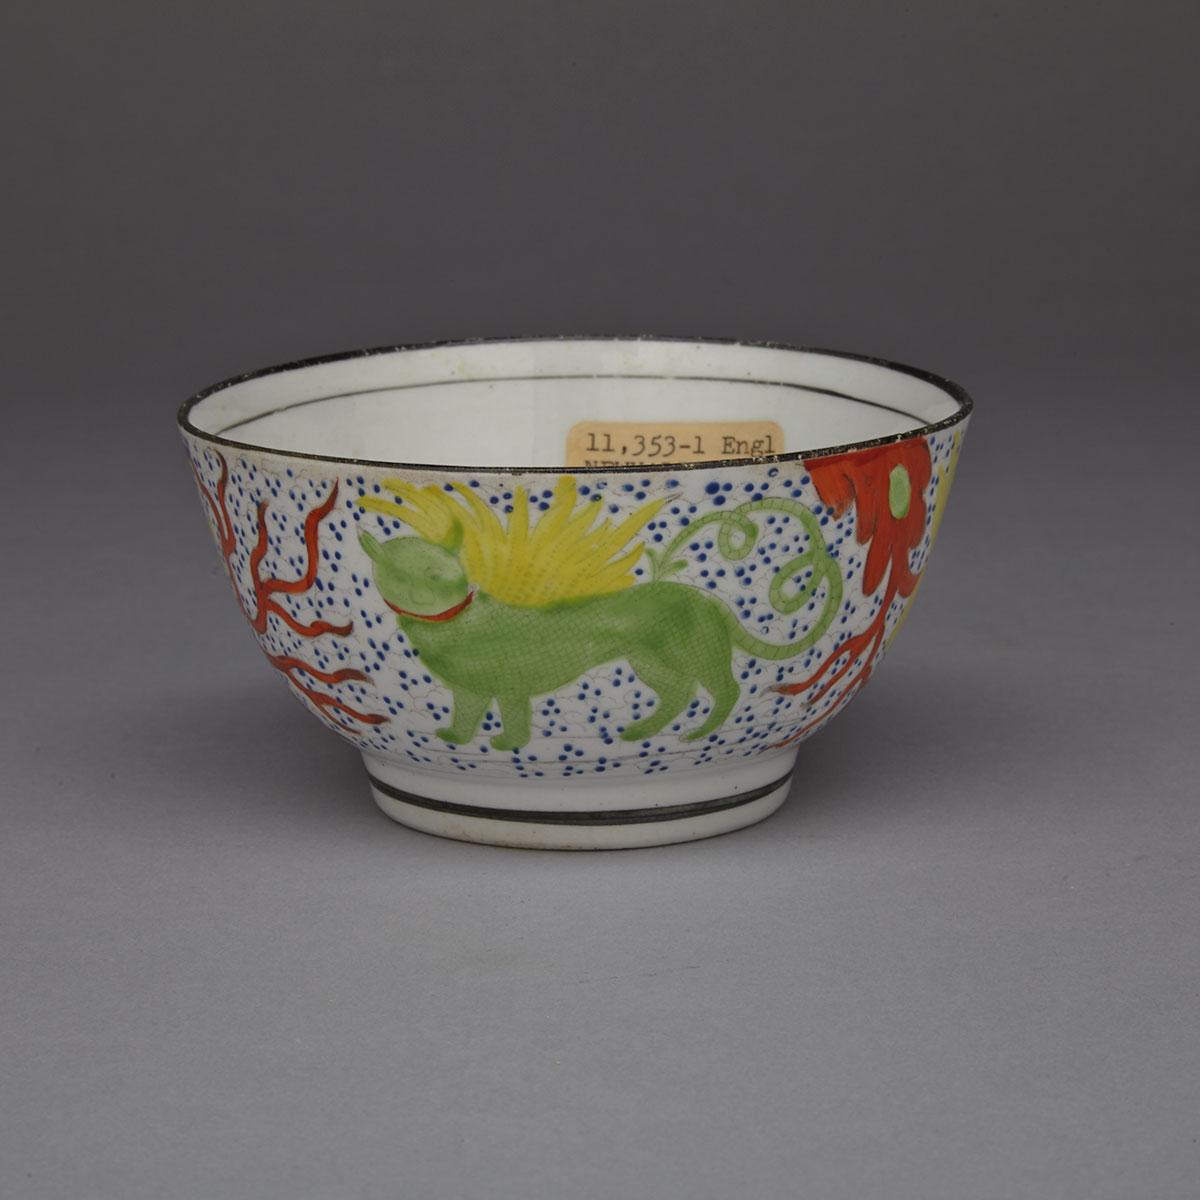 Newhall Bowl, early 19th century